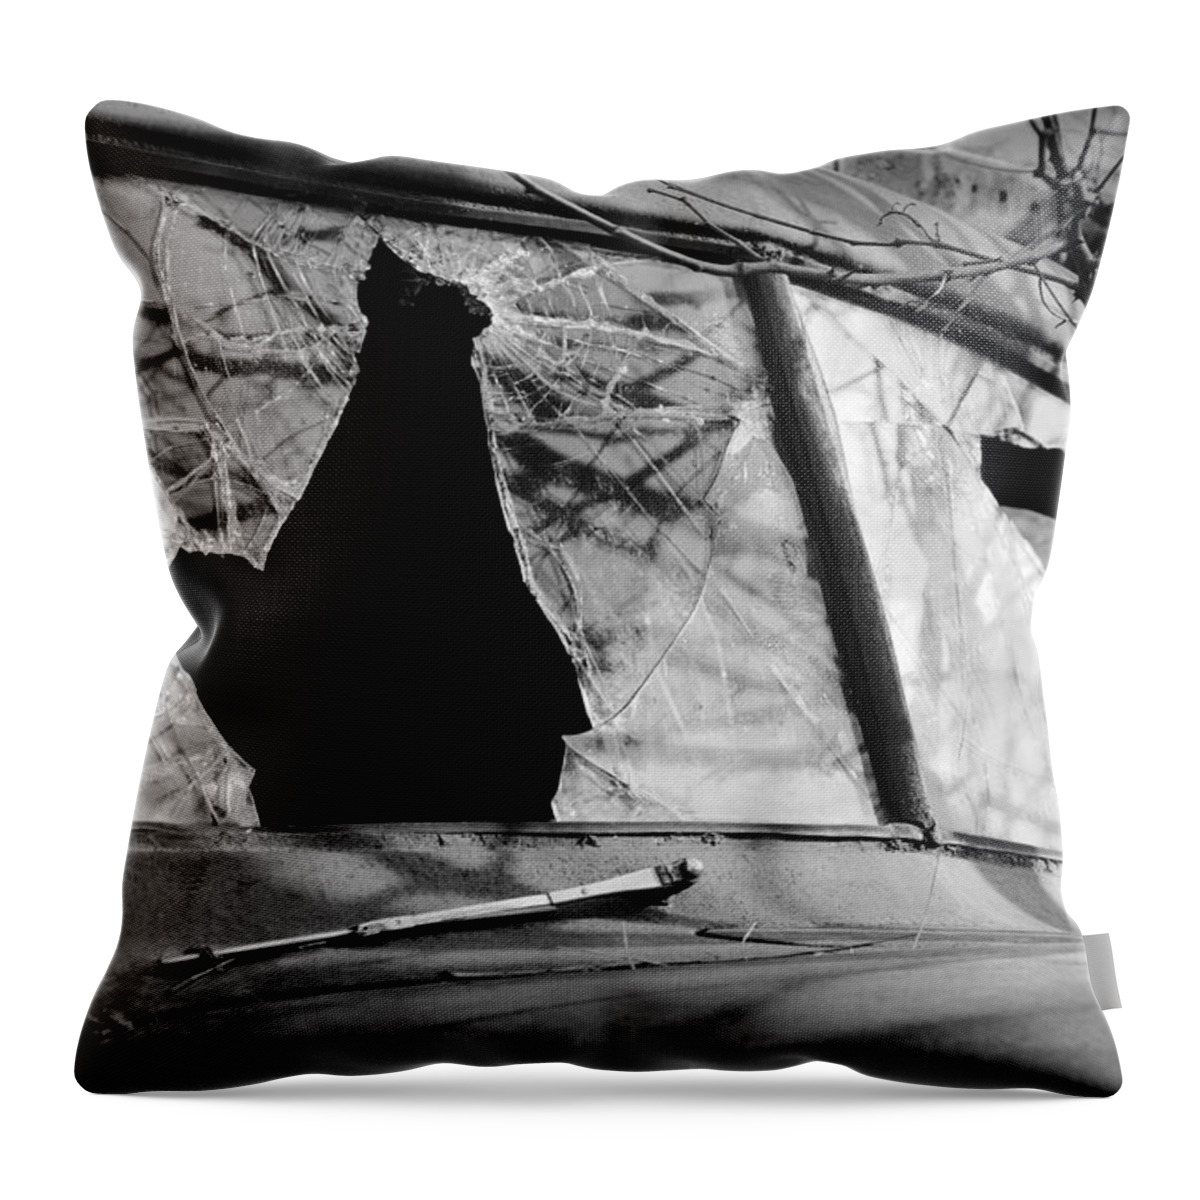 Gangster Throw Pillow featuring the photograph American Outlaw by Luke Moore